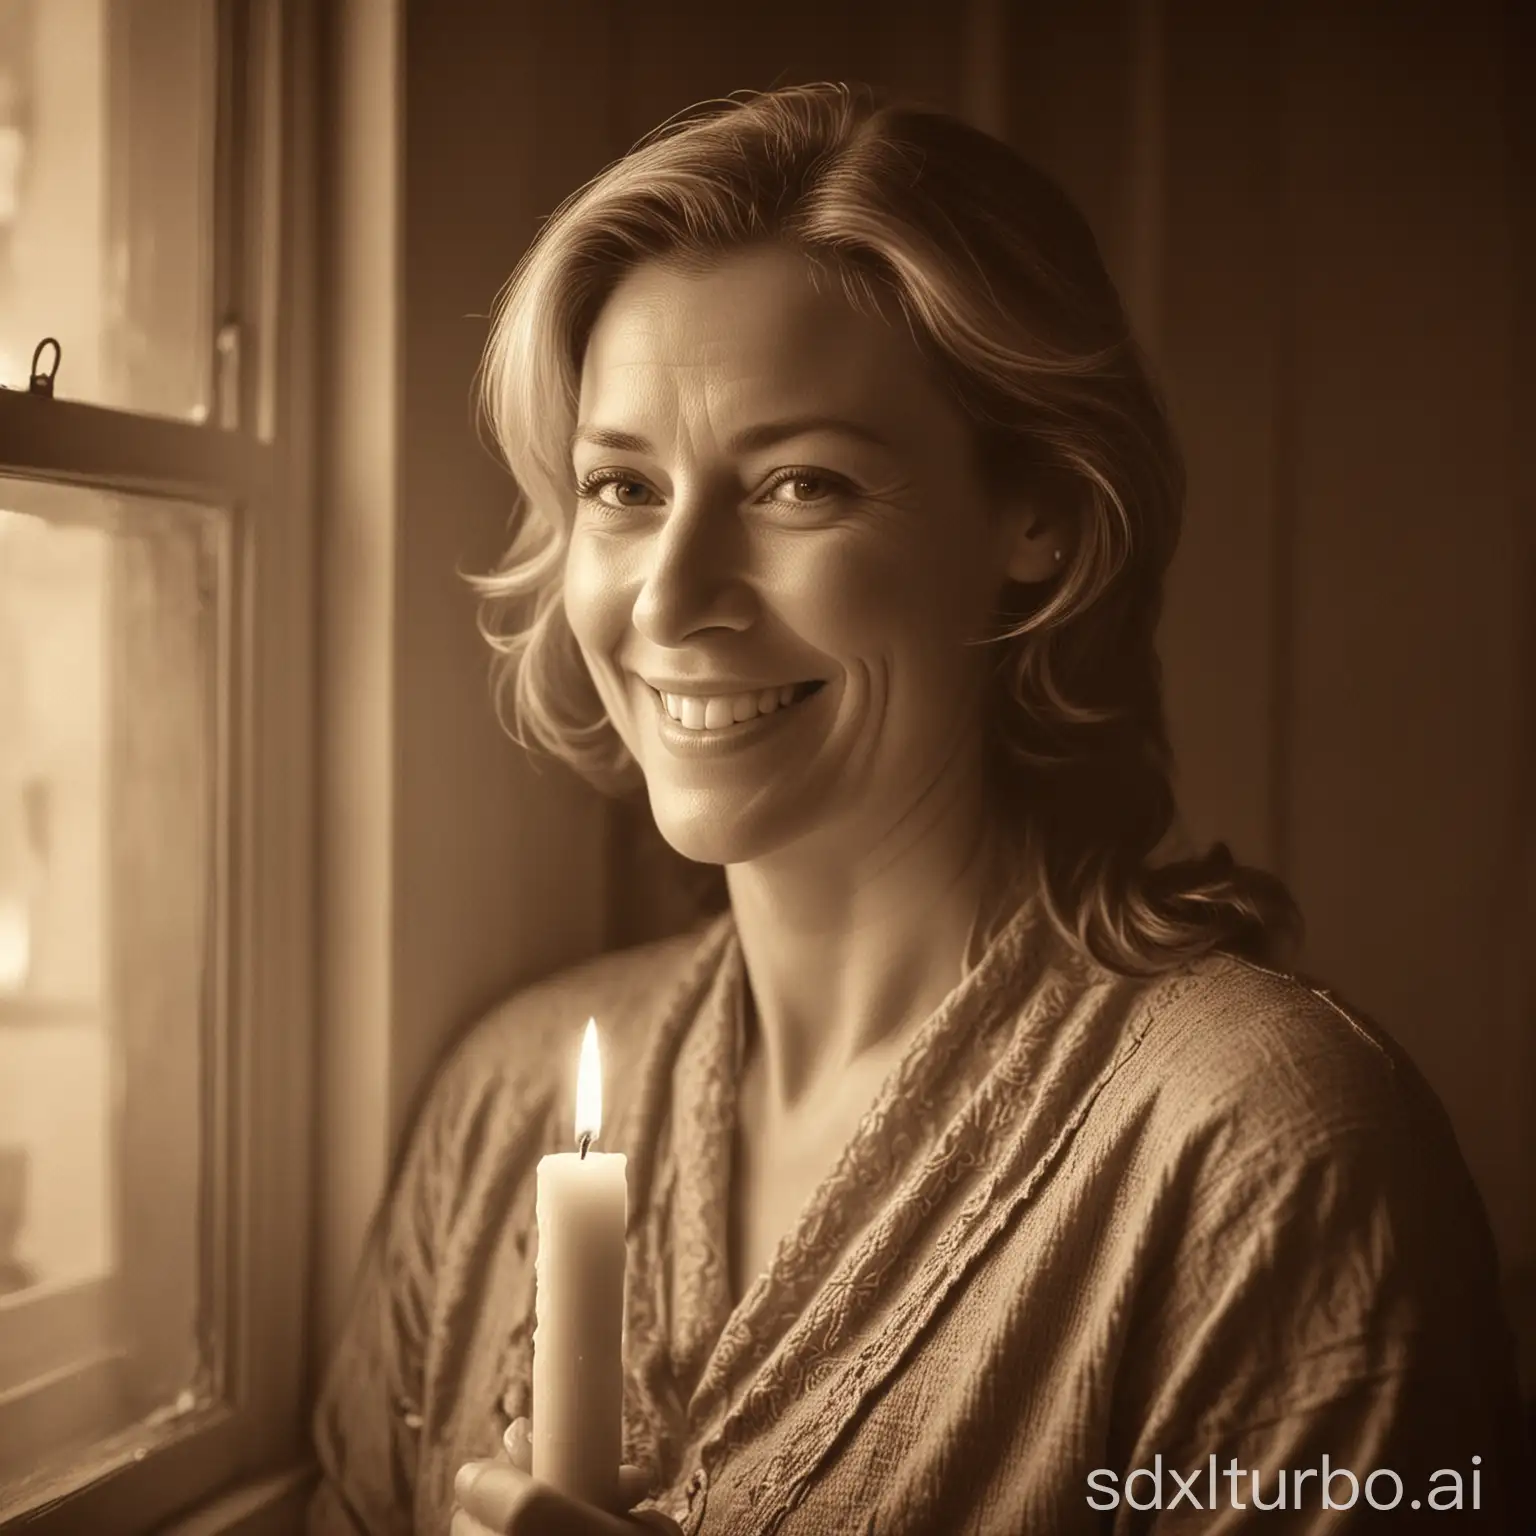 Smiling-MiddleAged-Woman-Holding-Candle-by-Window